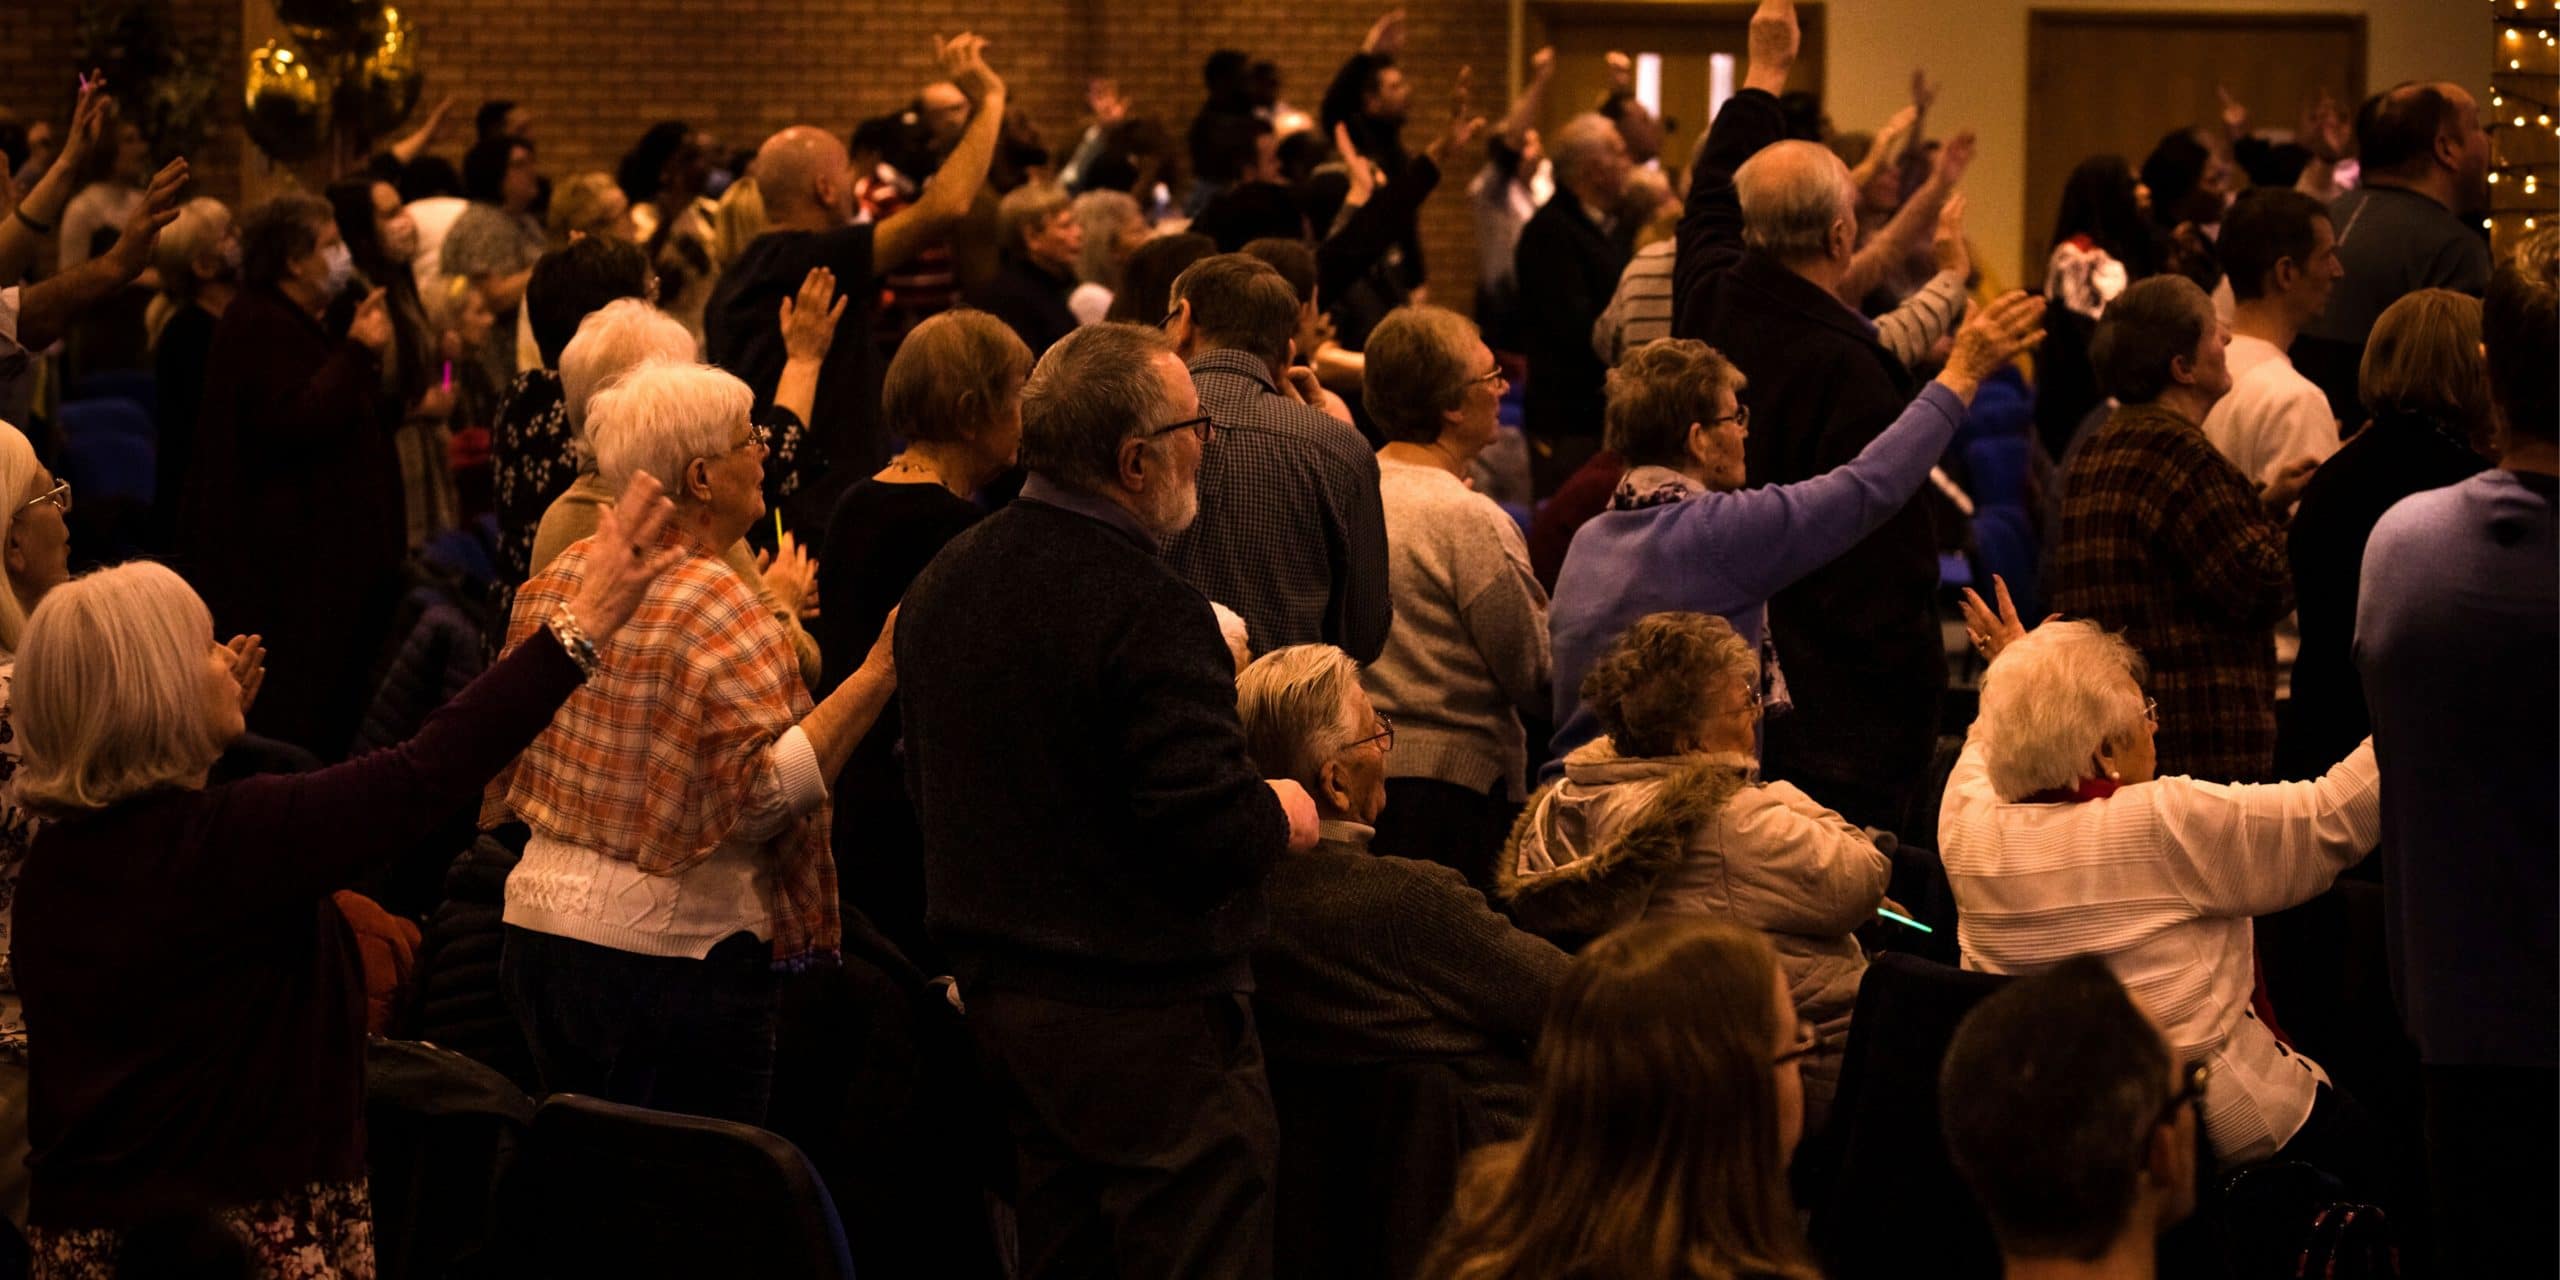 a group of people worshipping